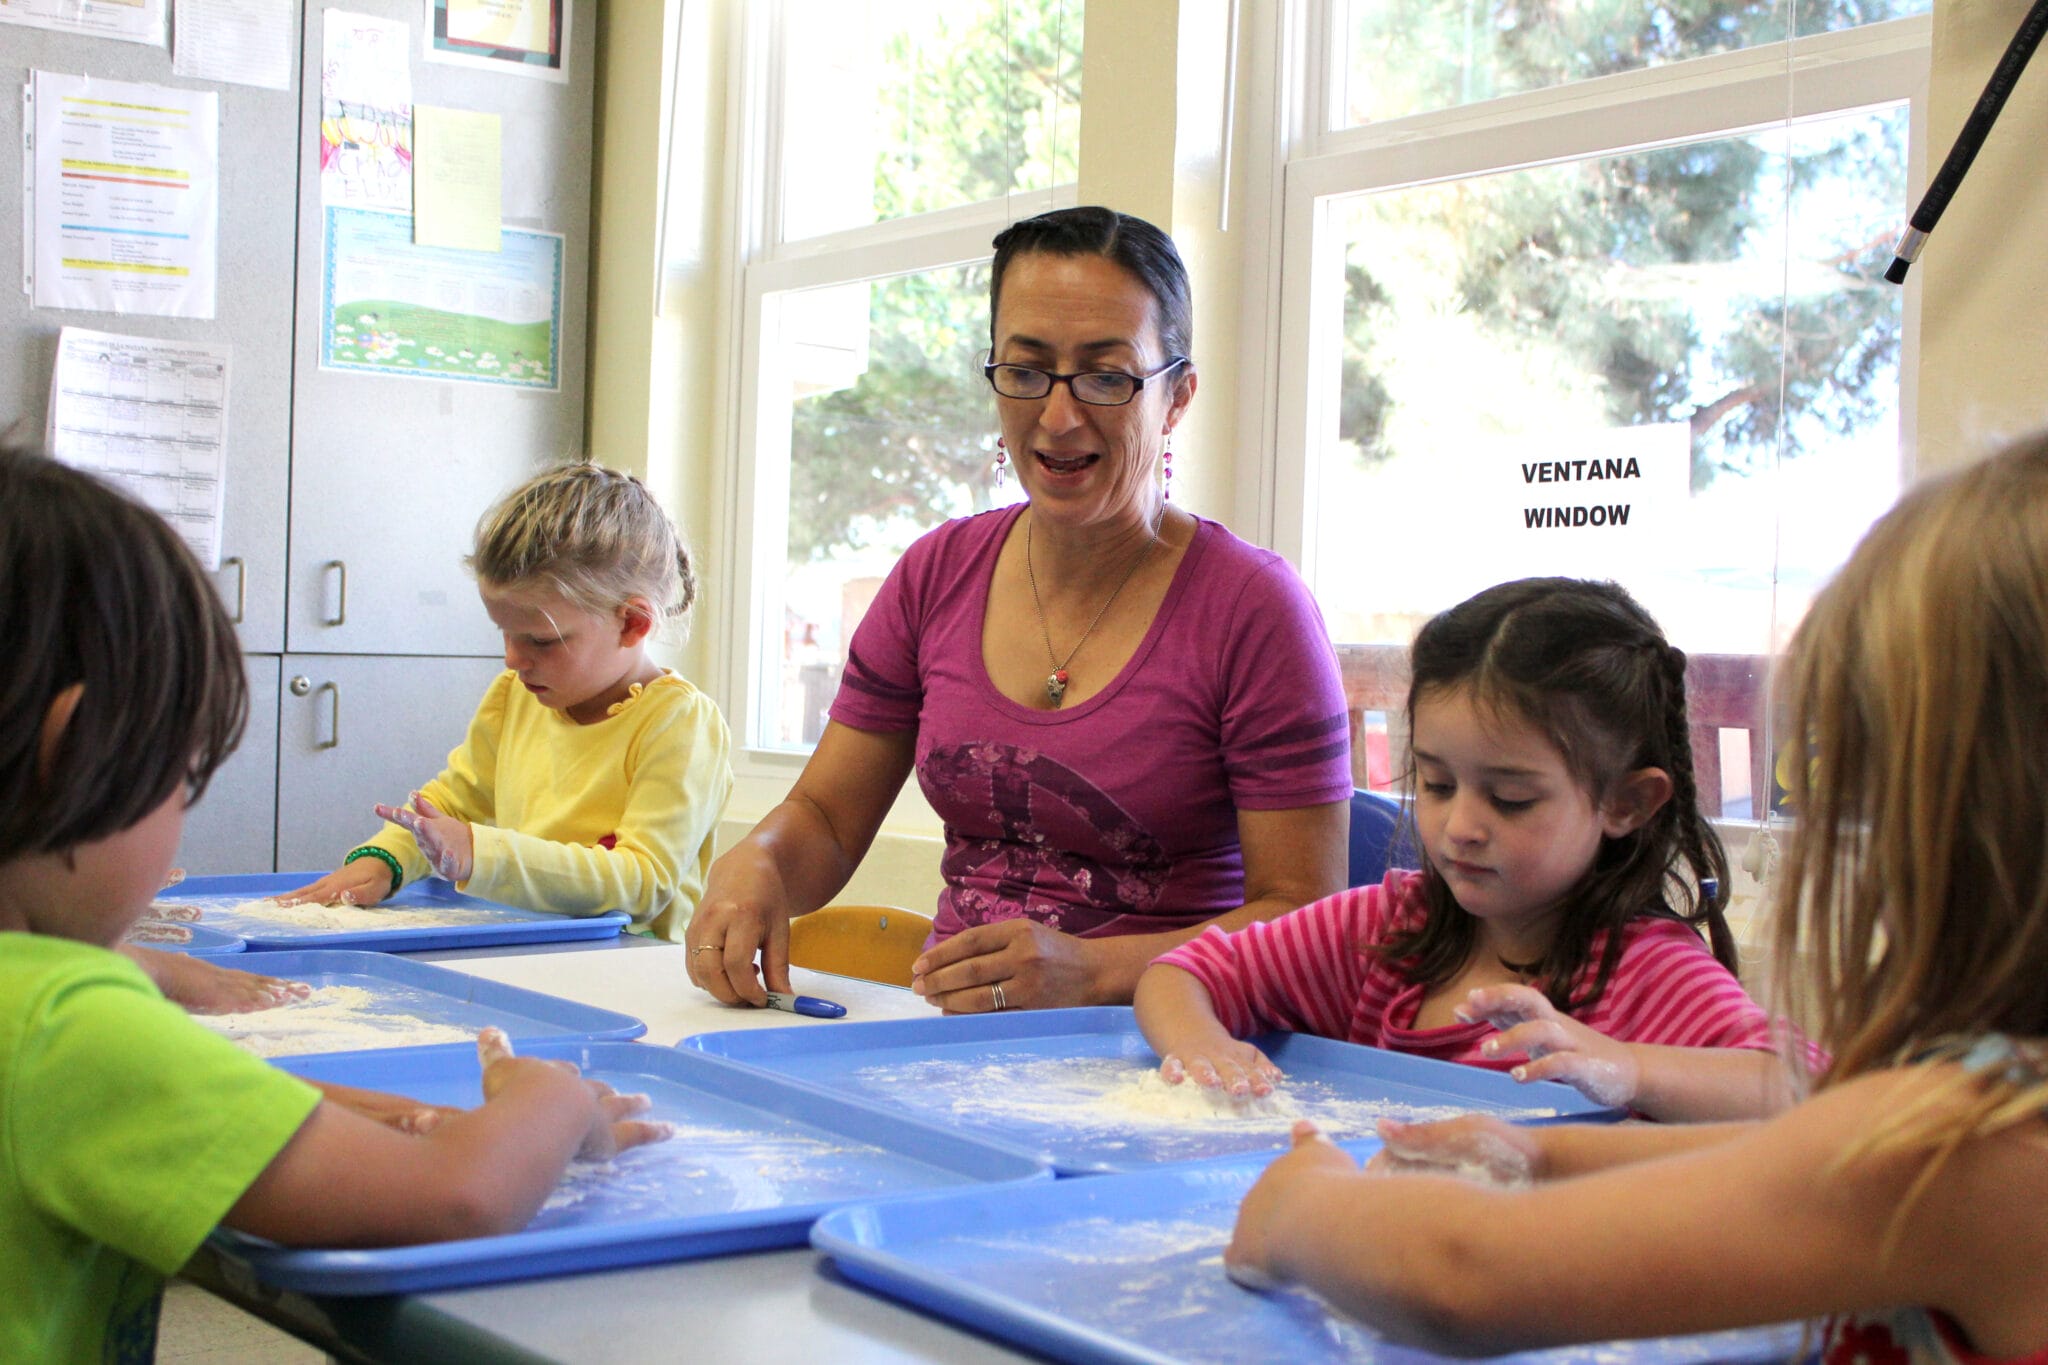 An early educator is helping children with their activity.